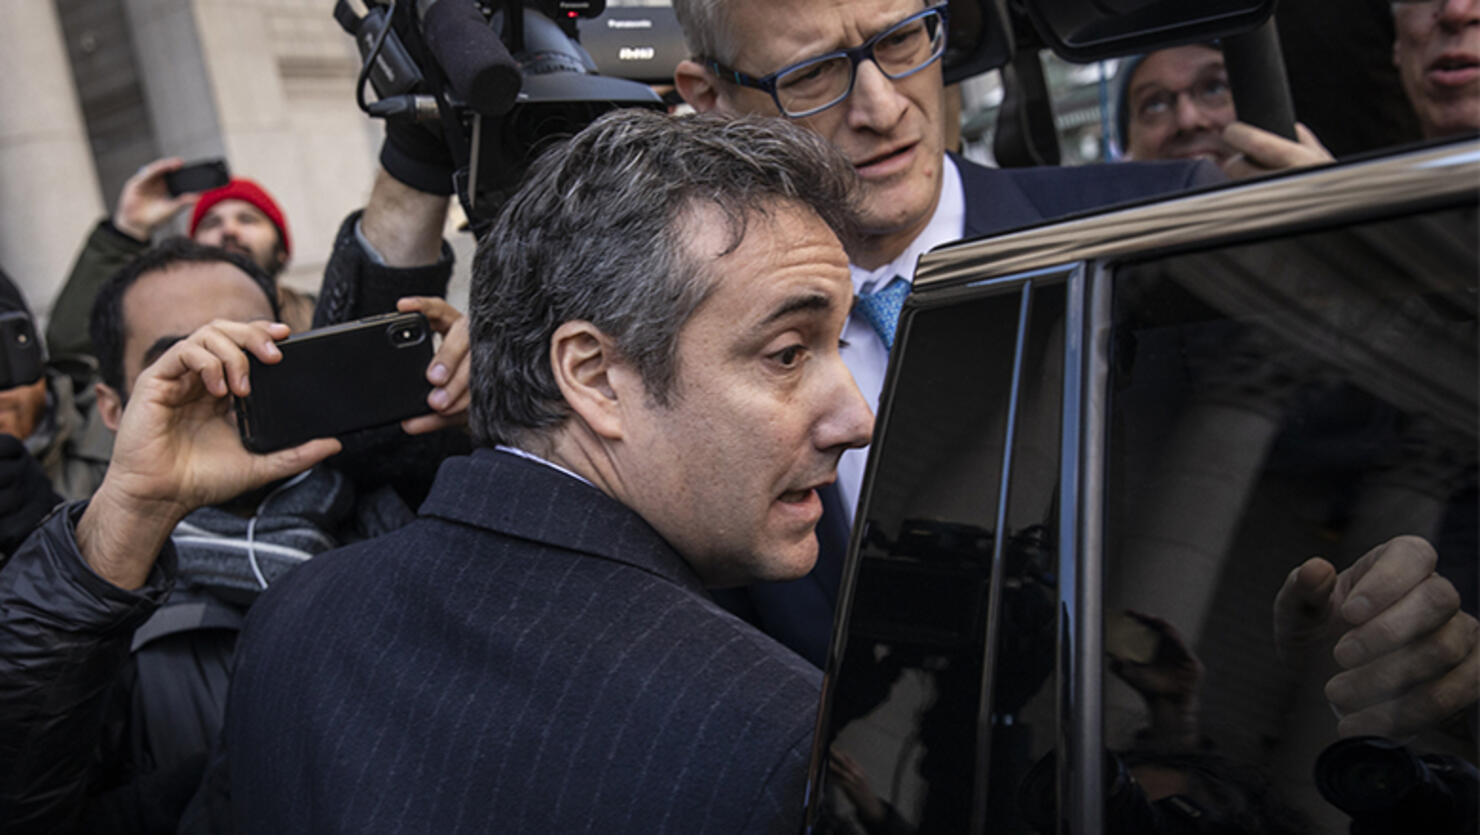 Michael Cohen, former personal attorney to President Donald Trump, exits federal court